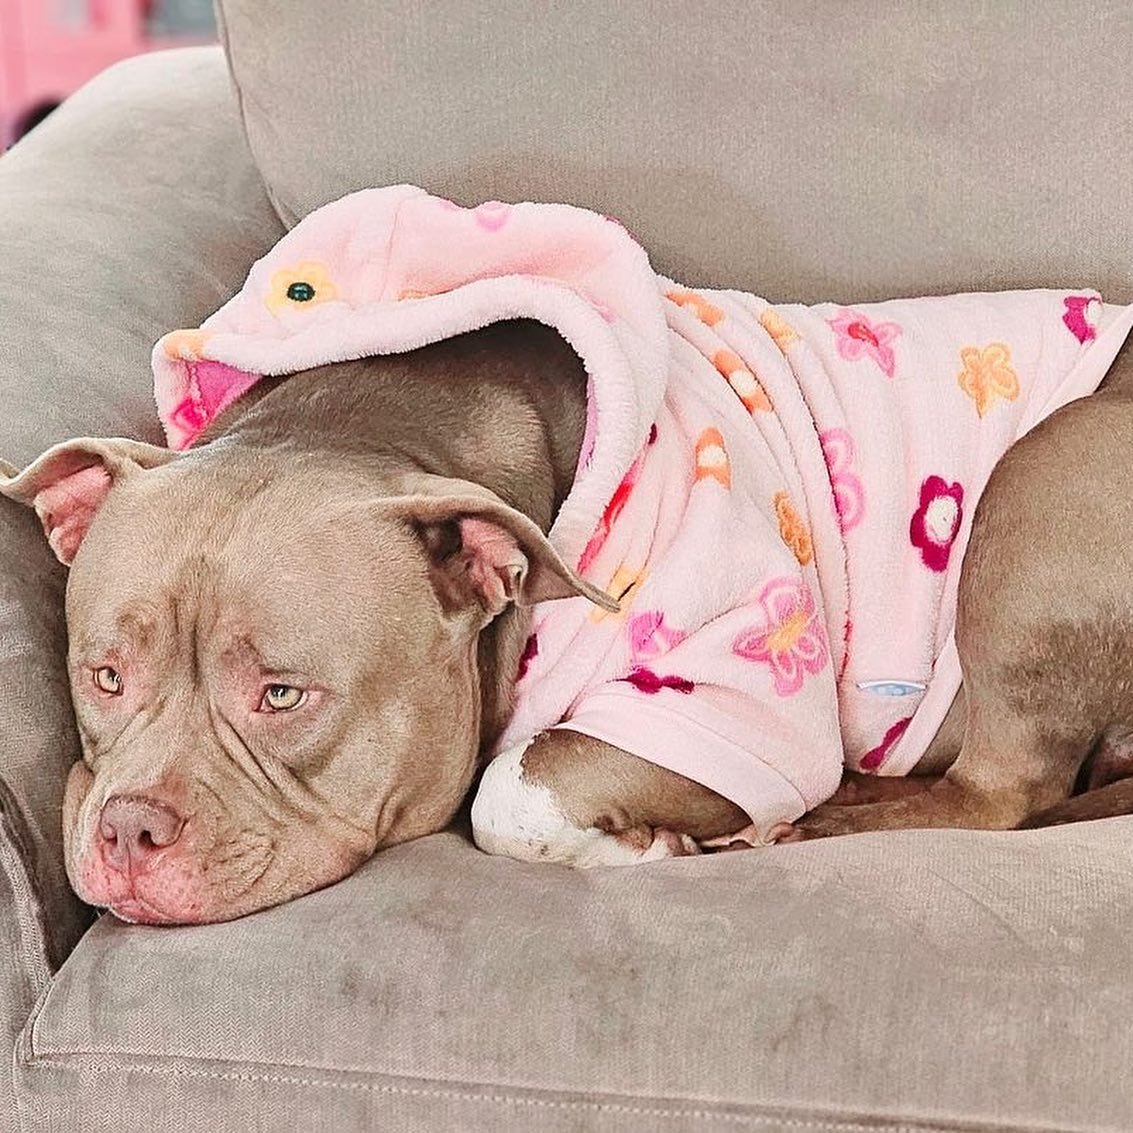 Who else is feeling the cold? 🥶 We know we are! 

Stay wrapped up! #doginacoat #staywarm